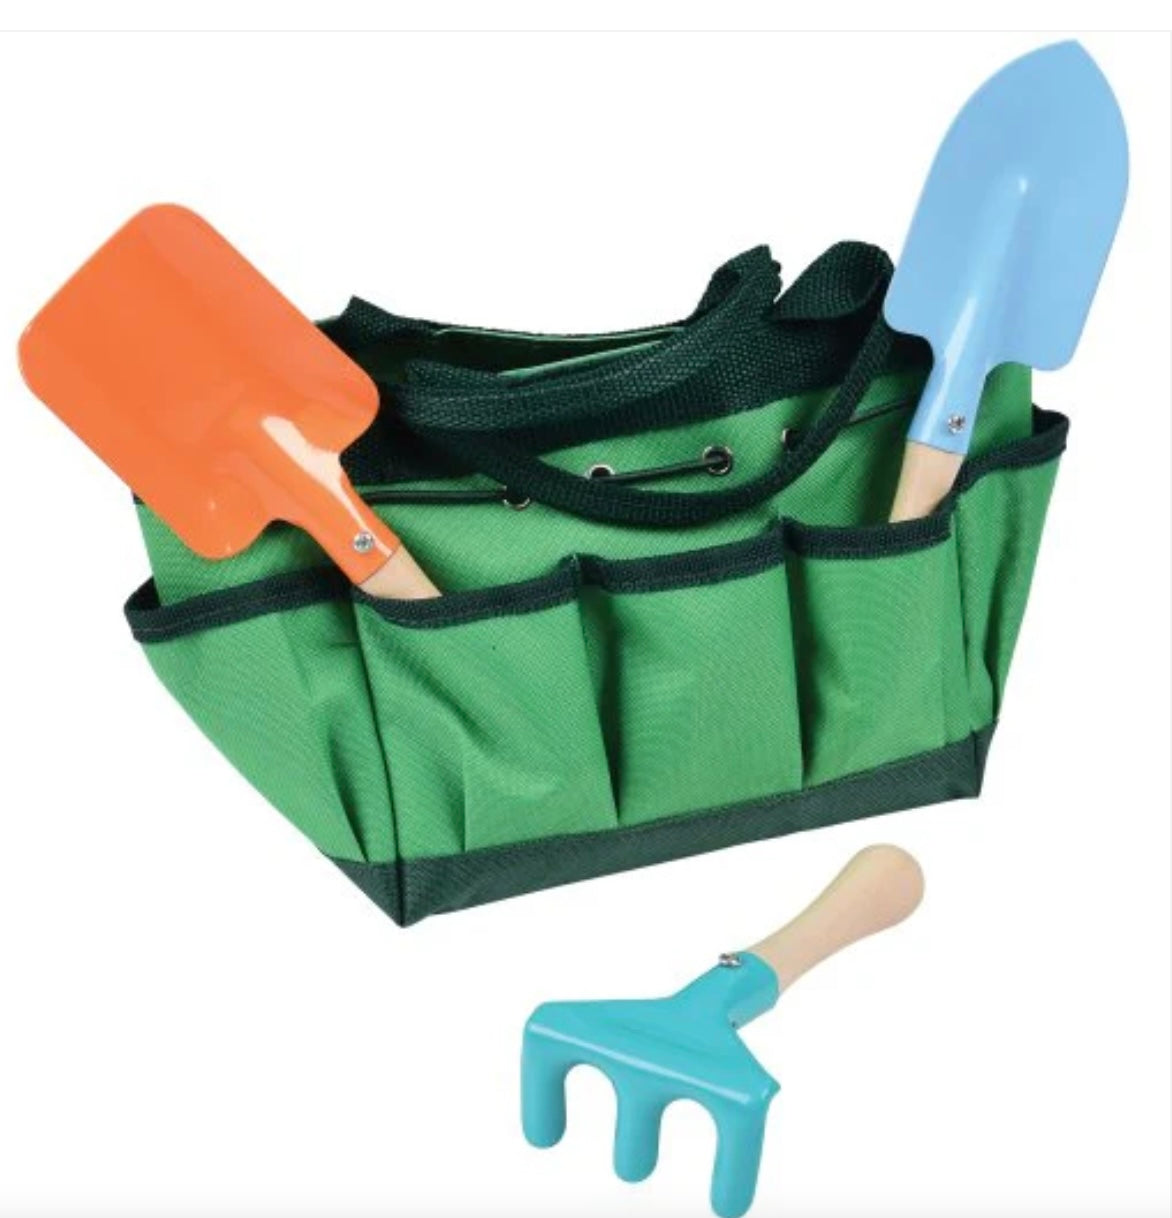 Kid's Gardening Tote by US Toy #4892